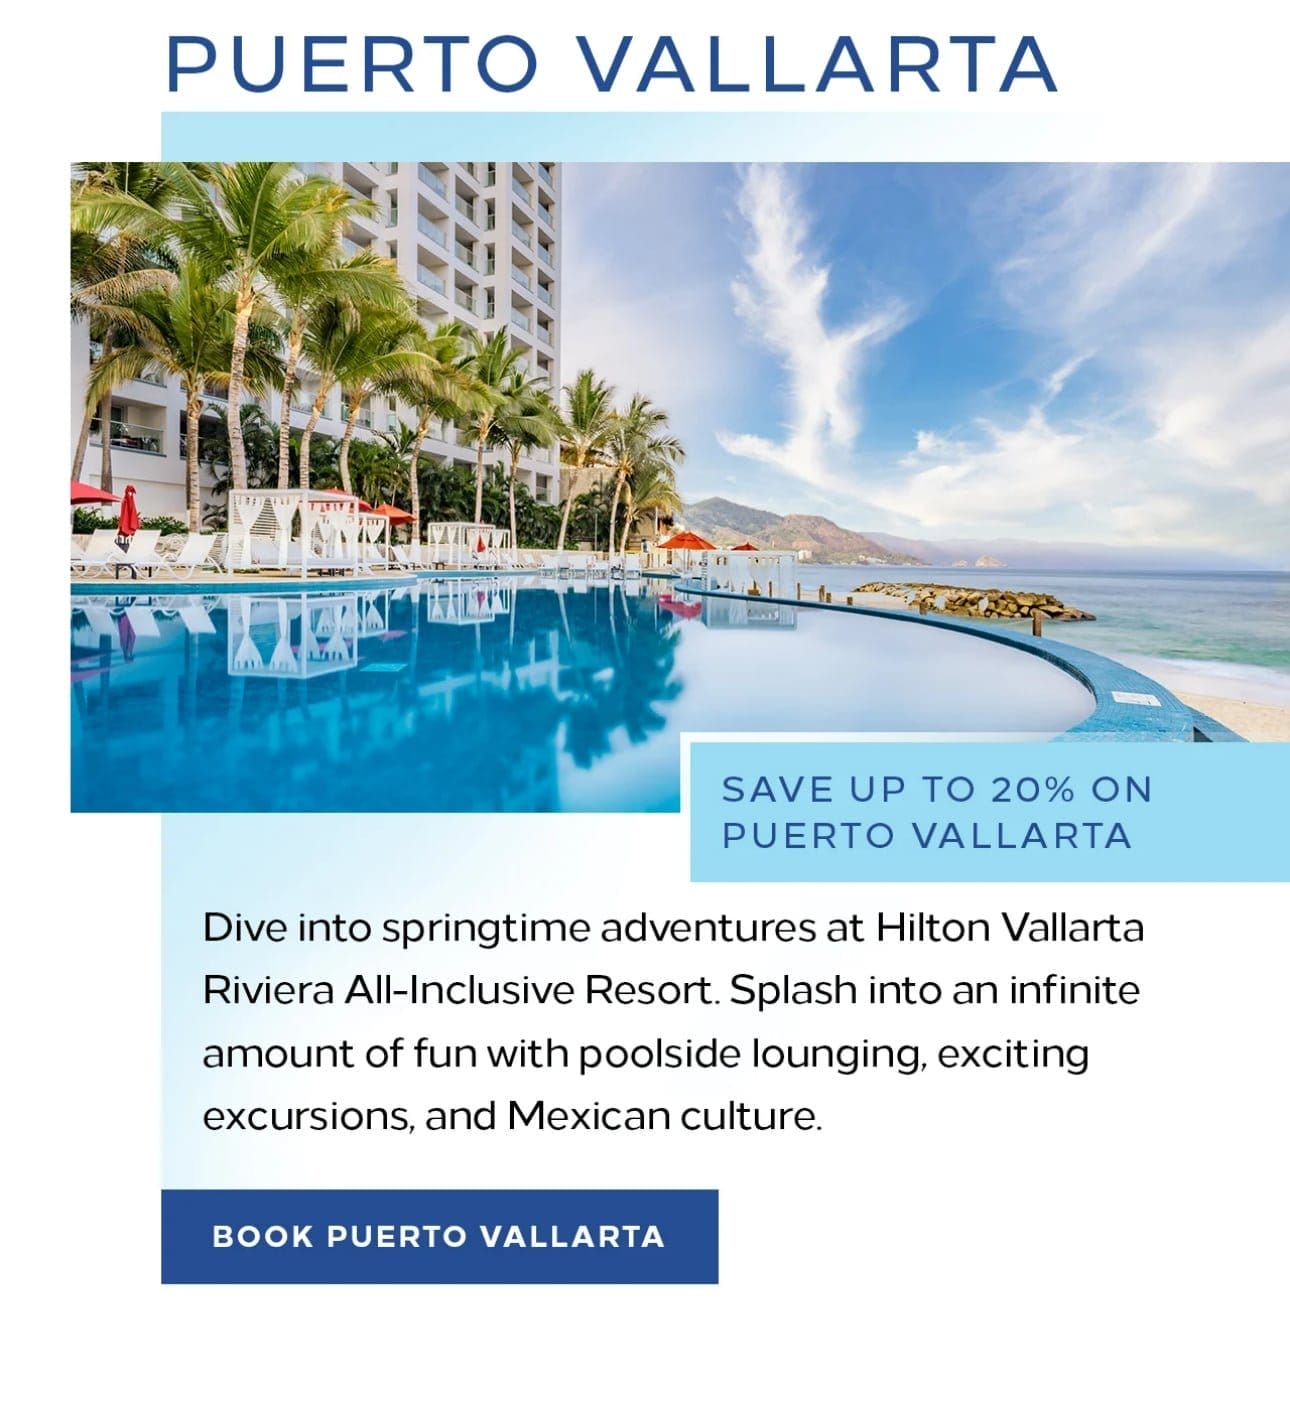  Puerto Vallarta. Save up to 20% on Puerto Vallarta. Dive into springtime adventures at Hilton Vallarta Riviera All-Inclusive Resort. Splash into an infinite amount of fun with poolside lounging, exciting excursions, and Mexican culture. Book Puerto Vallarta. 